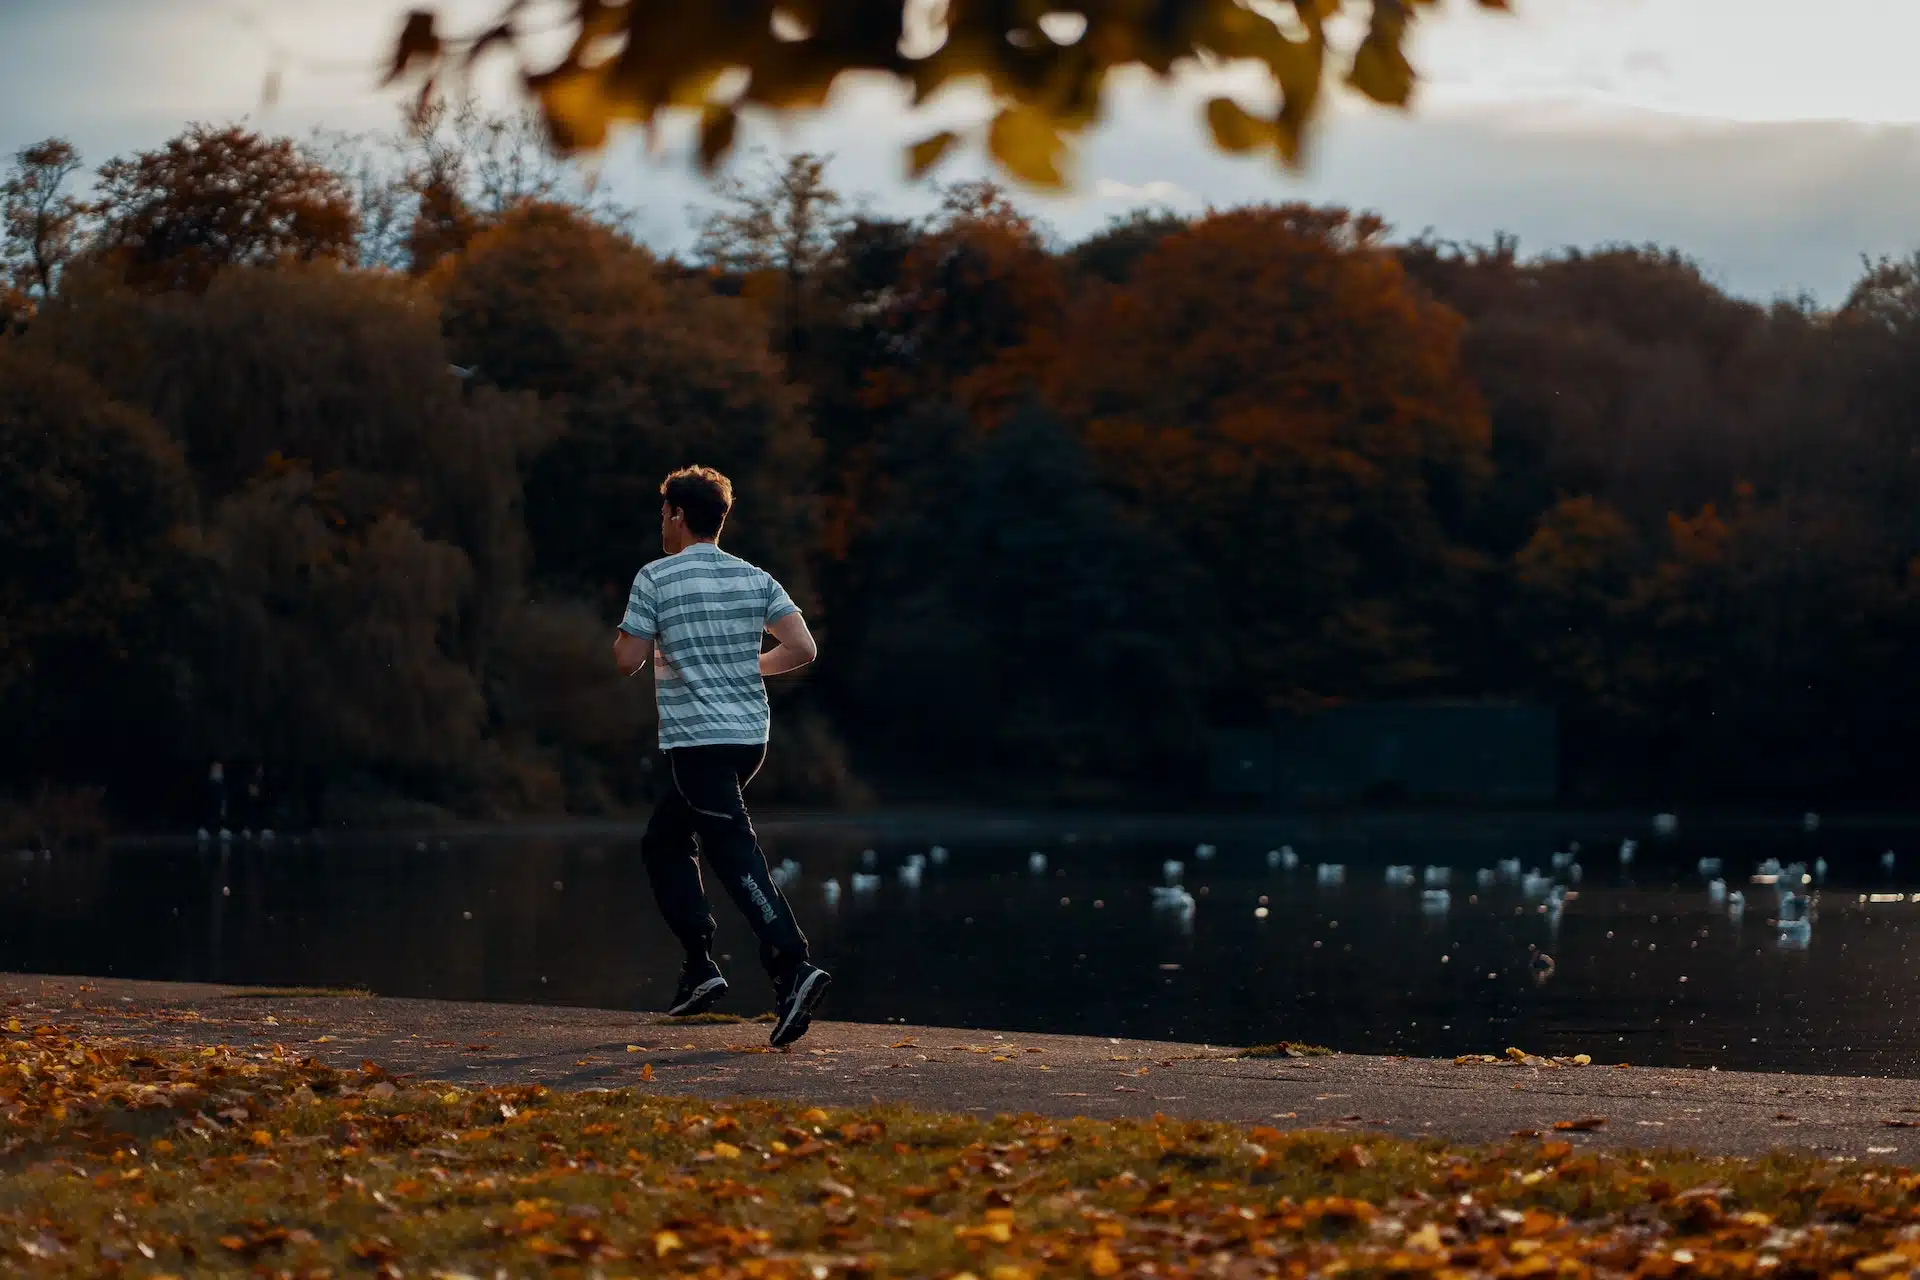 A runner running into the distance in a park